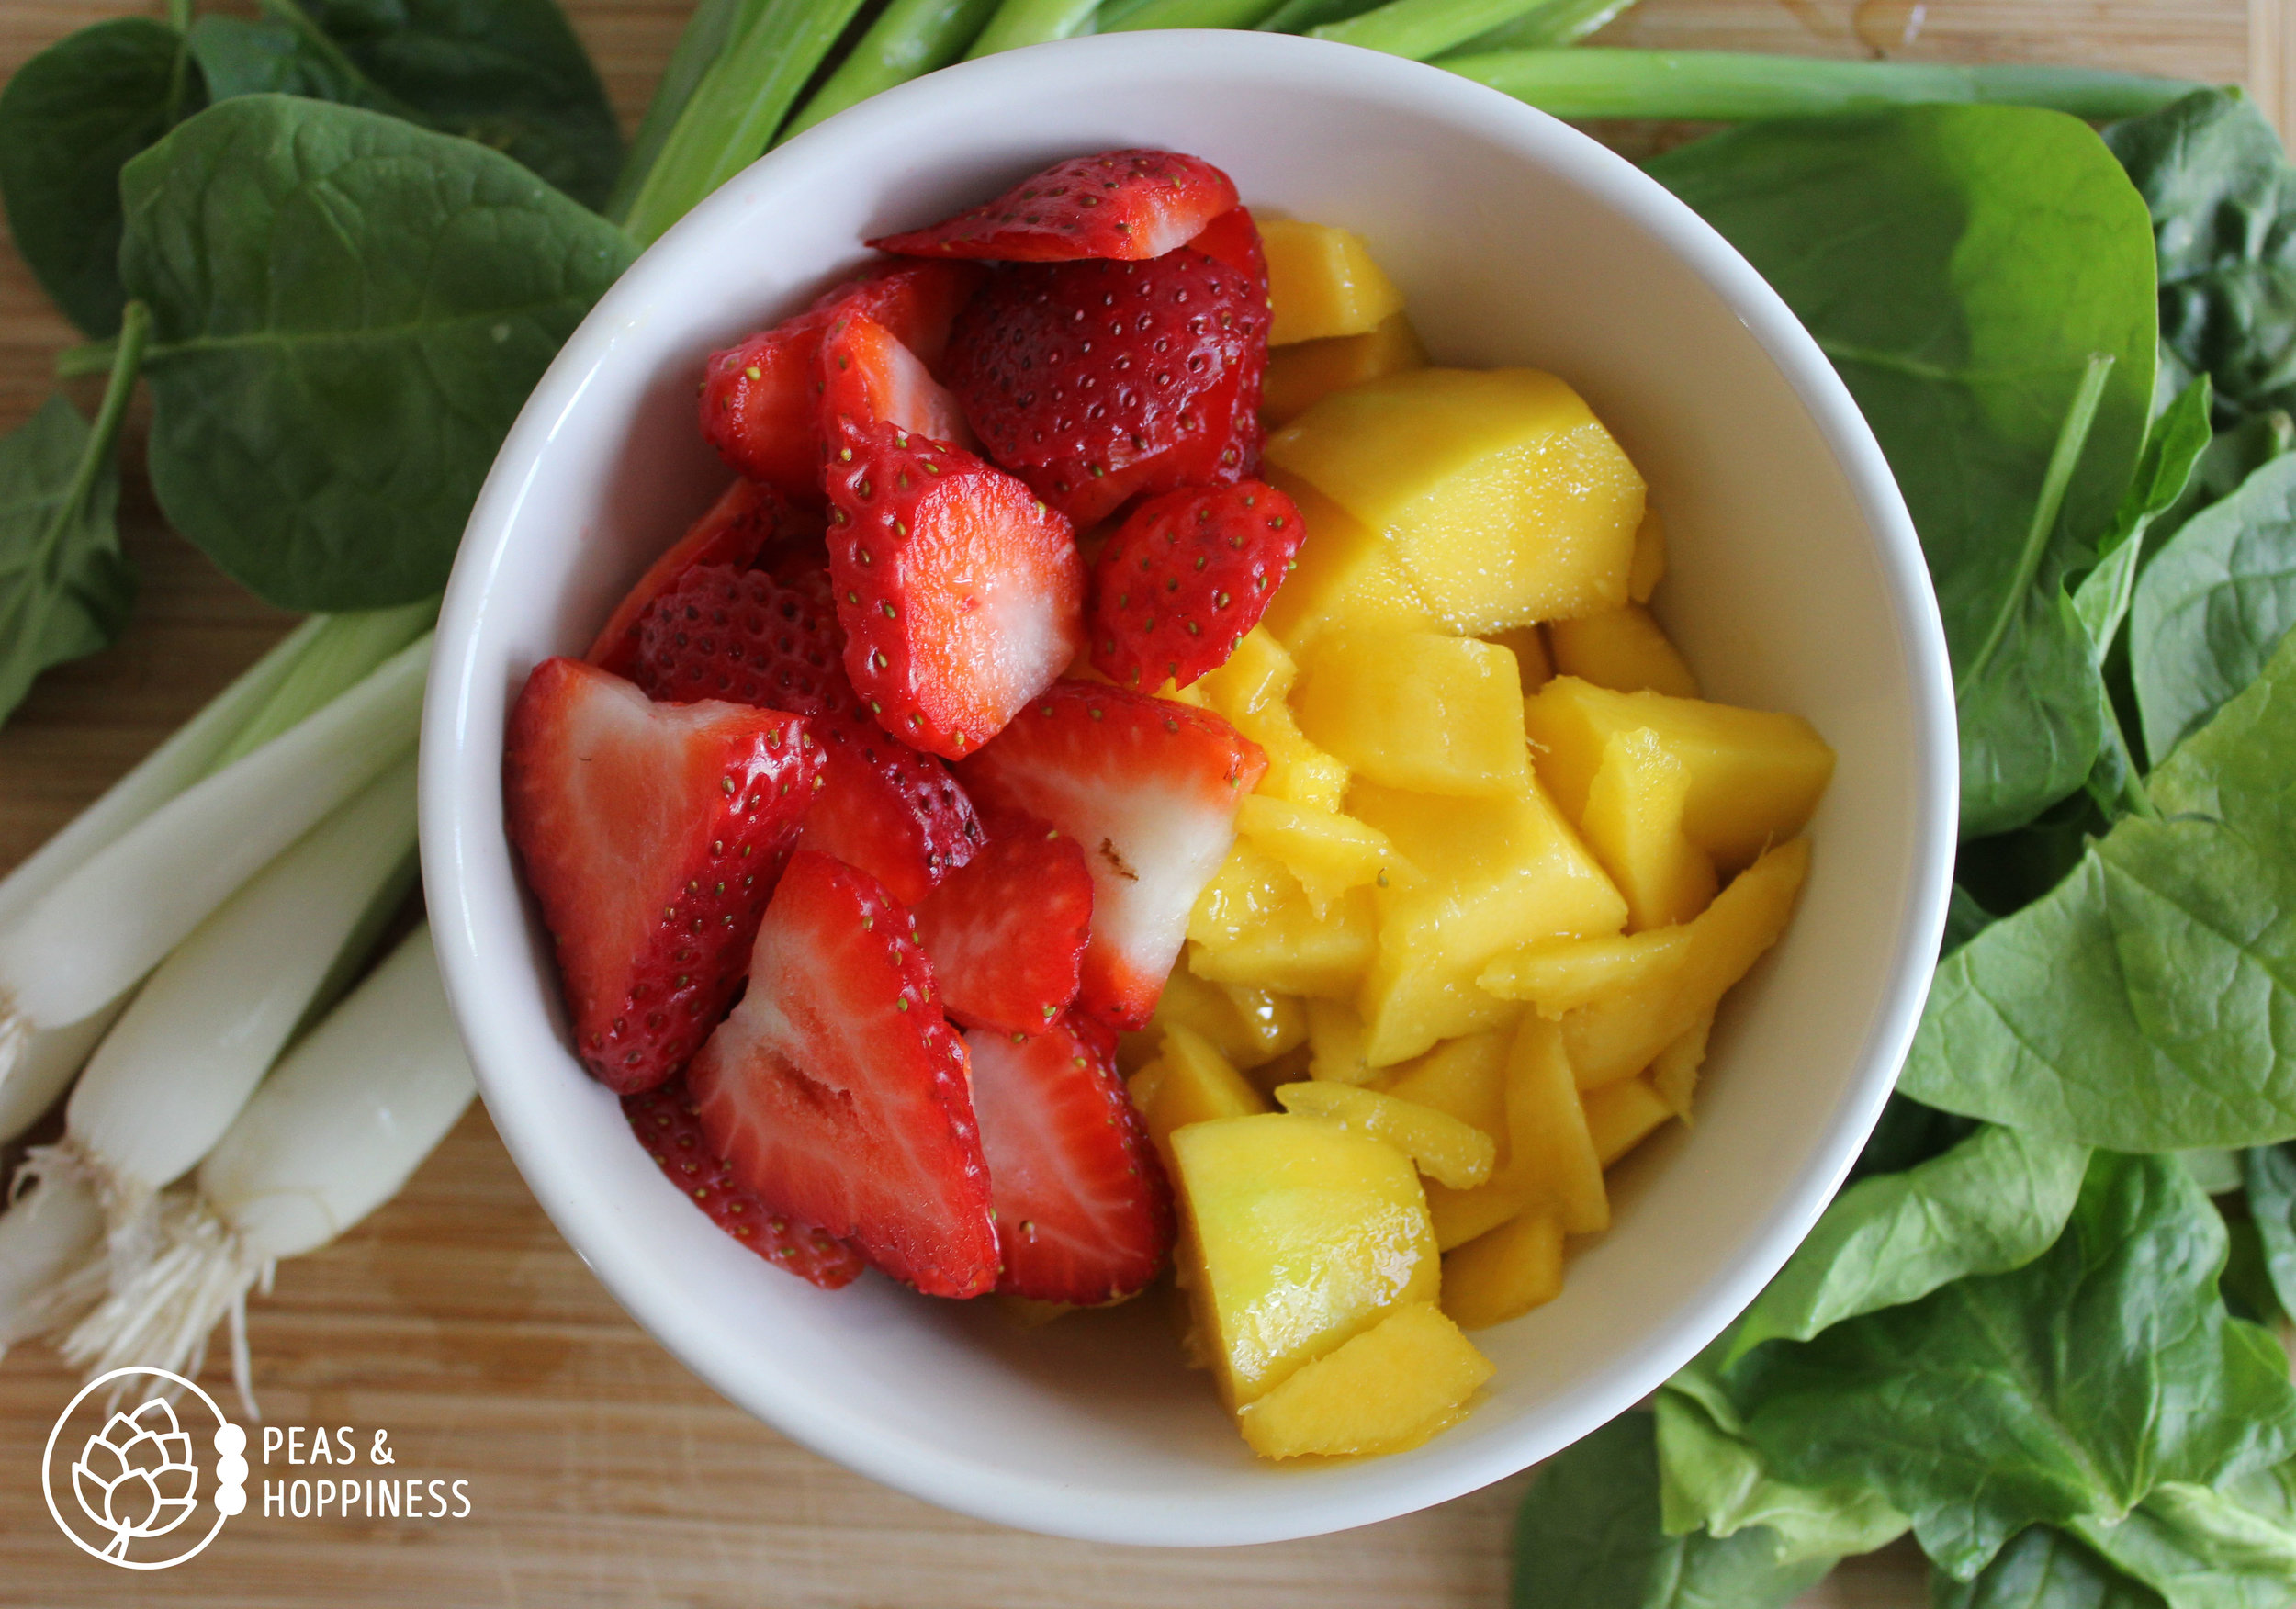 Strawberry Mango Spinach Salad from Peas and Hoppiness - www.peasandhoppiness.com